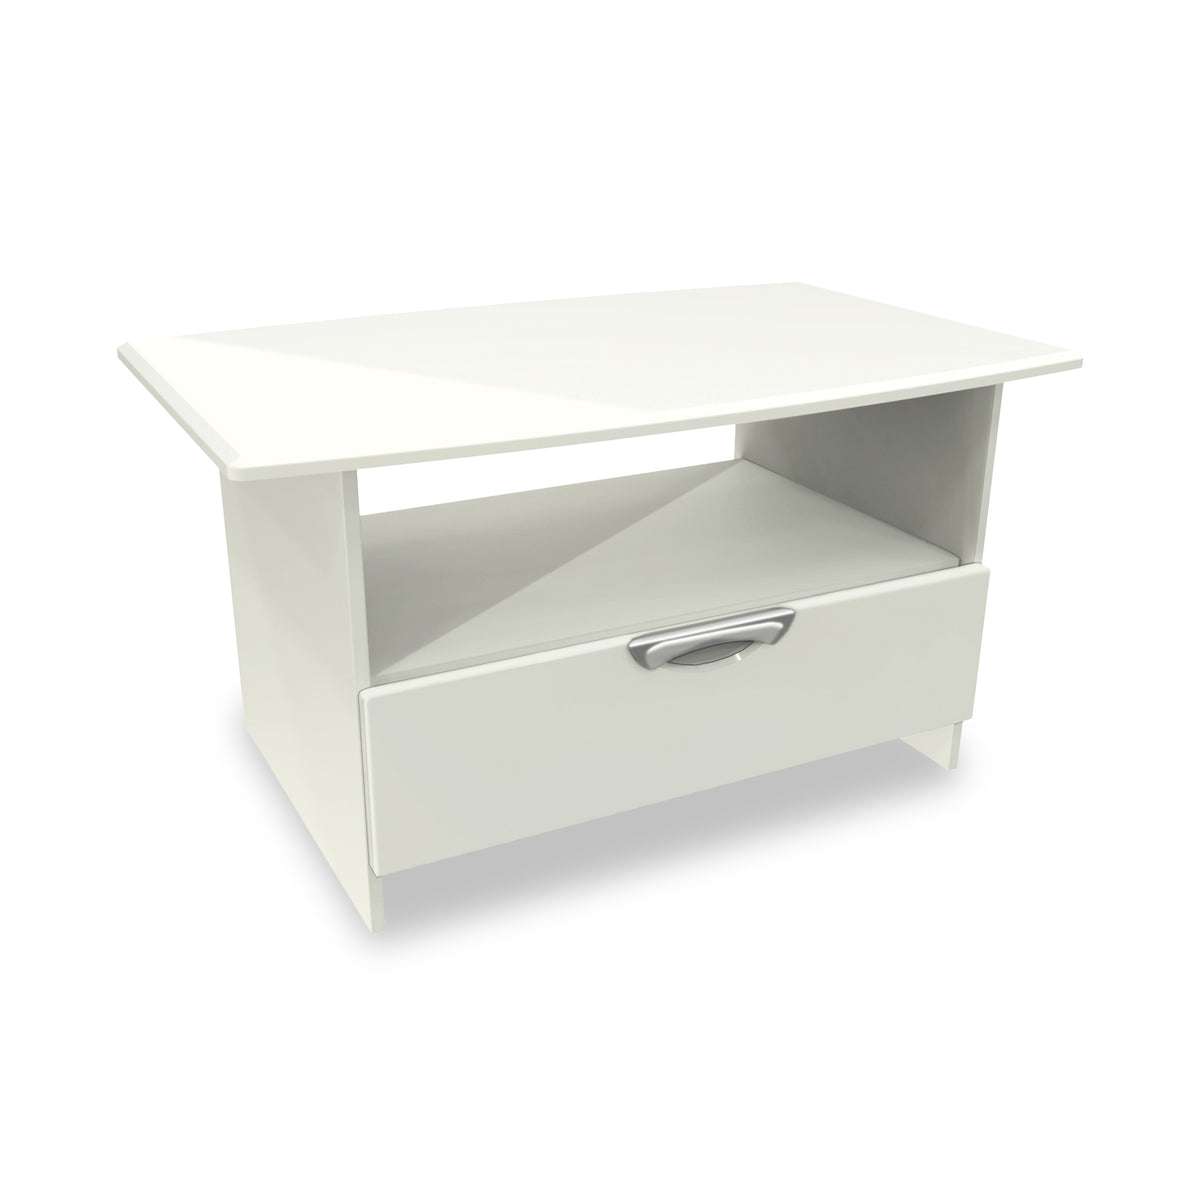 Beckett Cream Gloss 1 Drawer with Open Shelf Coffee Table by Roseland Furniture